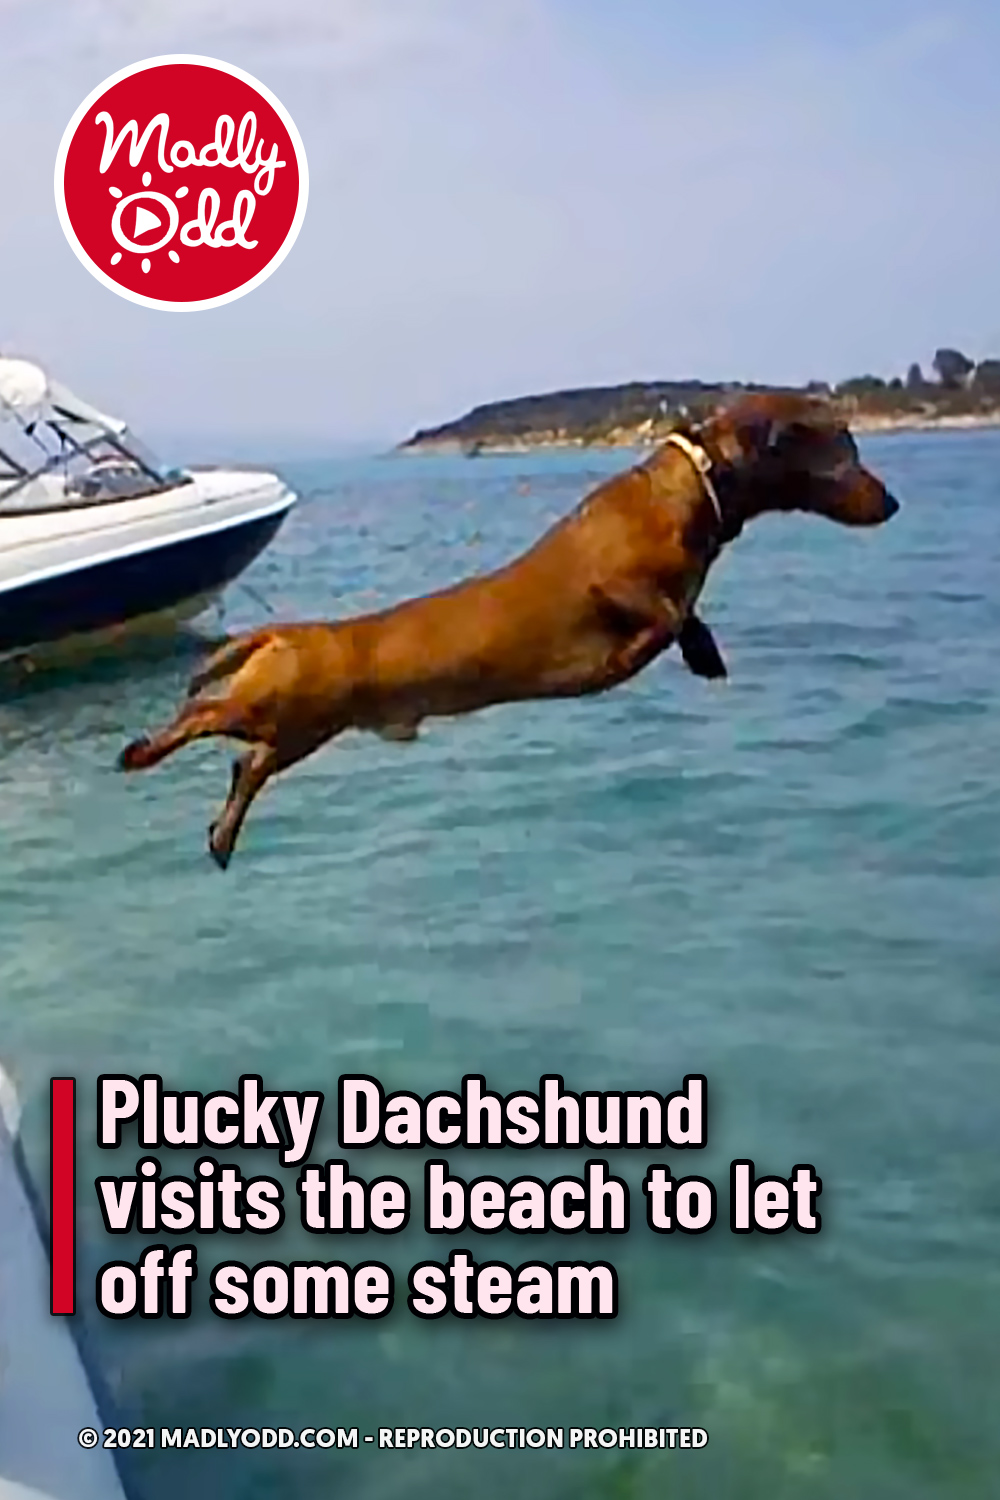 Plucky Dachshund visits the beach to let off some steam